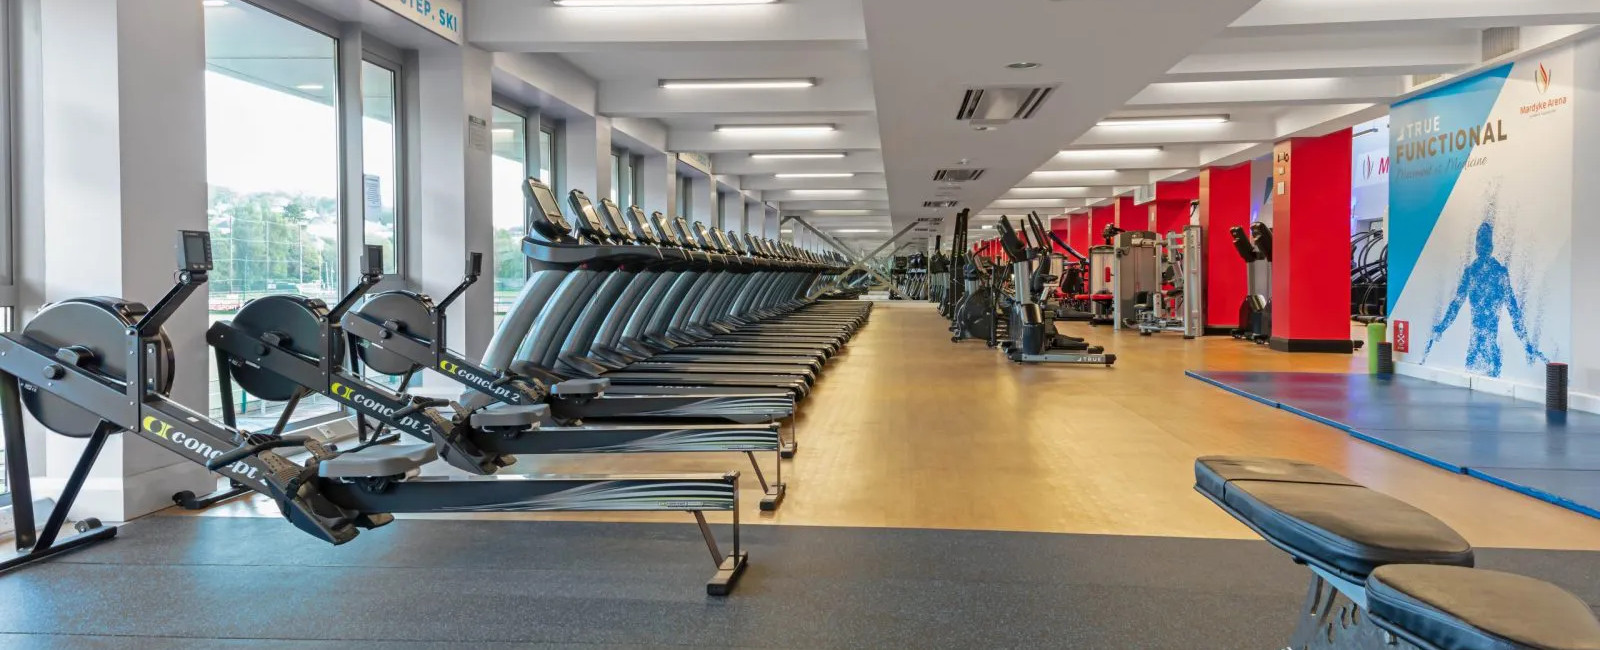 How to Design and Layout a Functional Commercial Gym